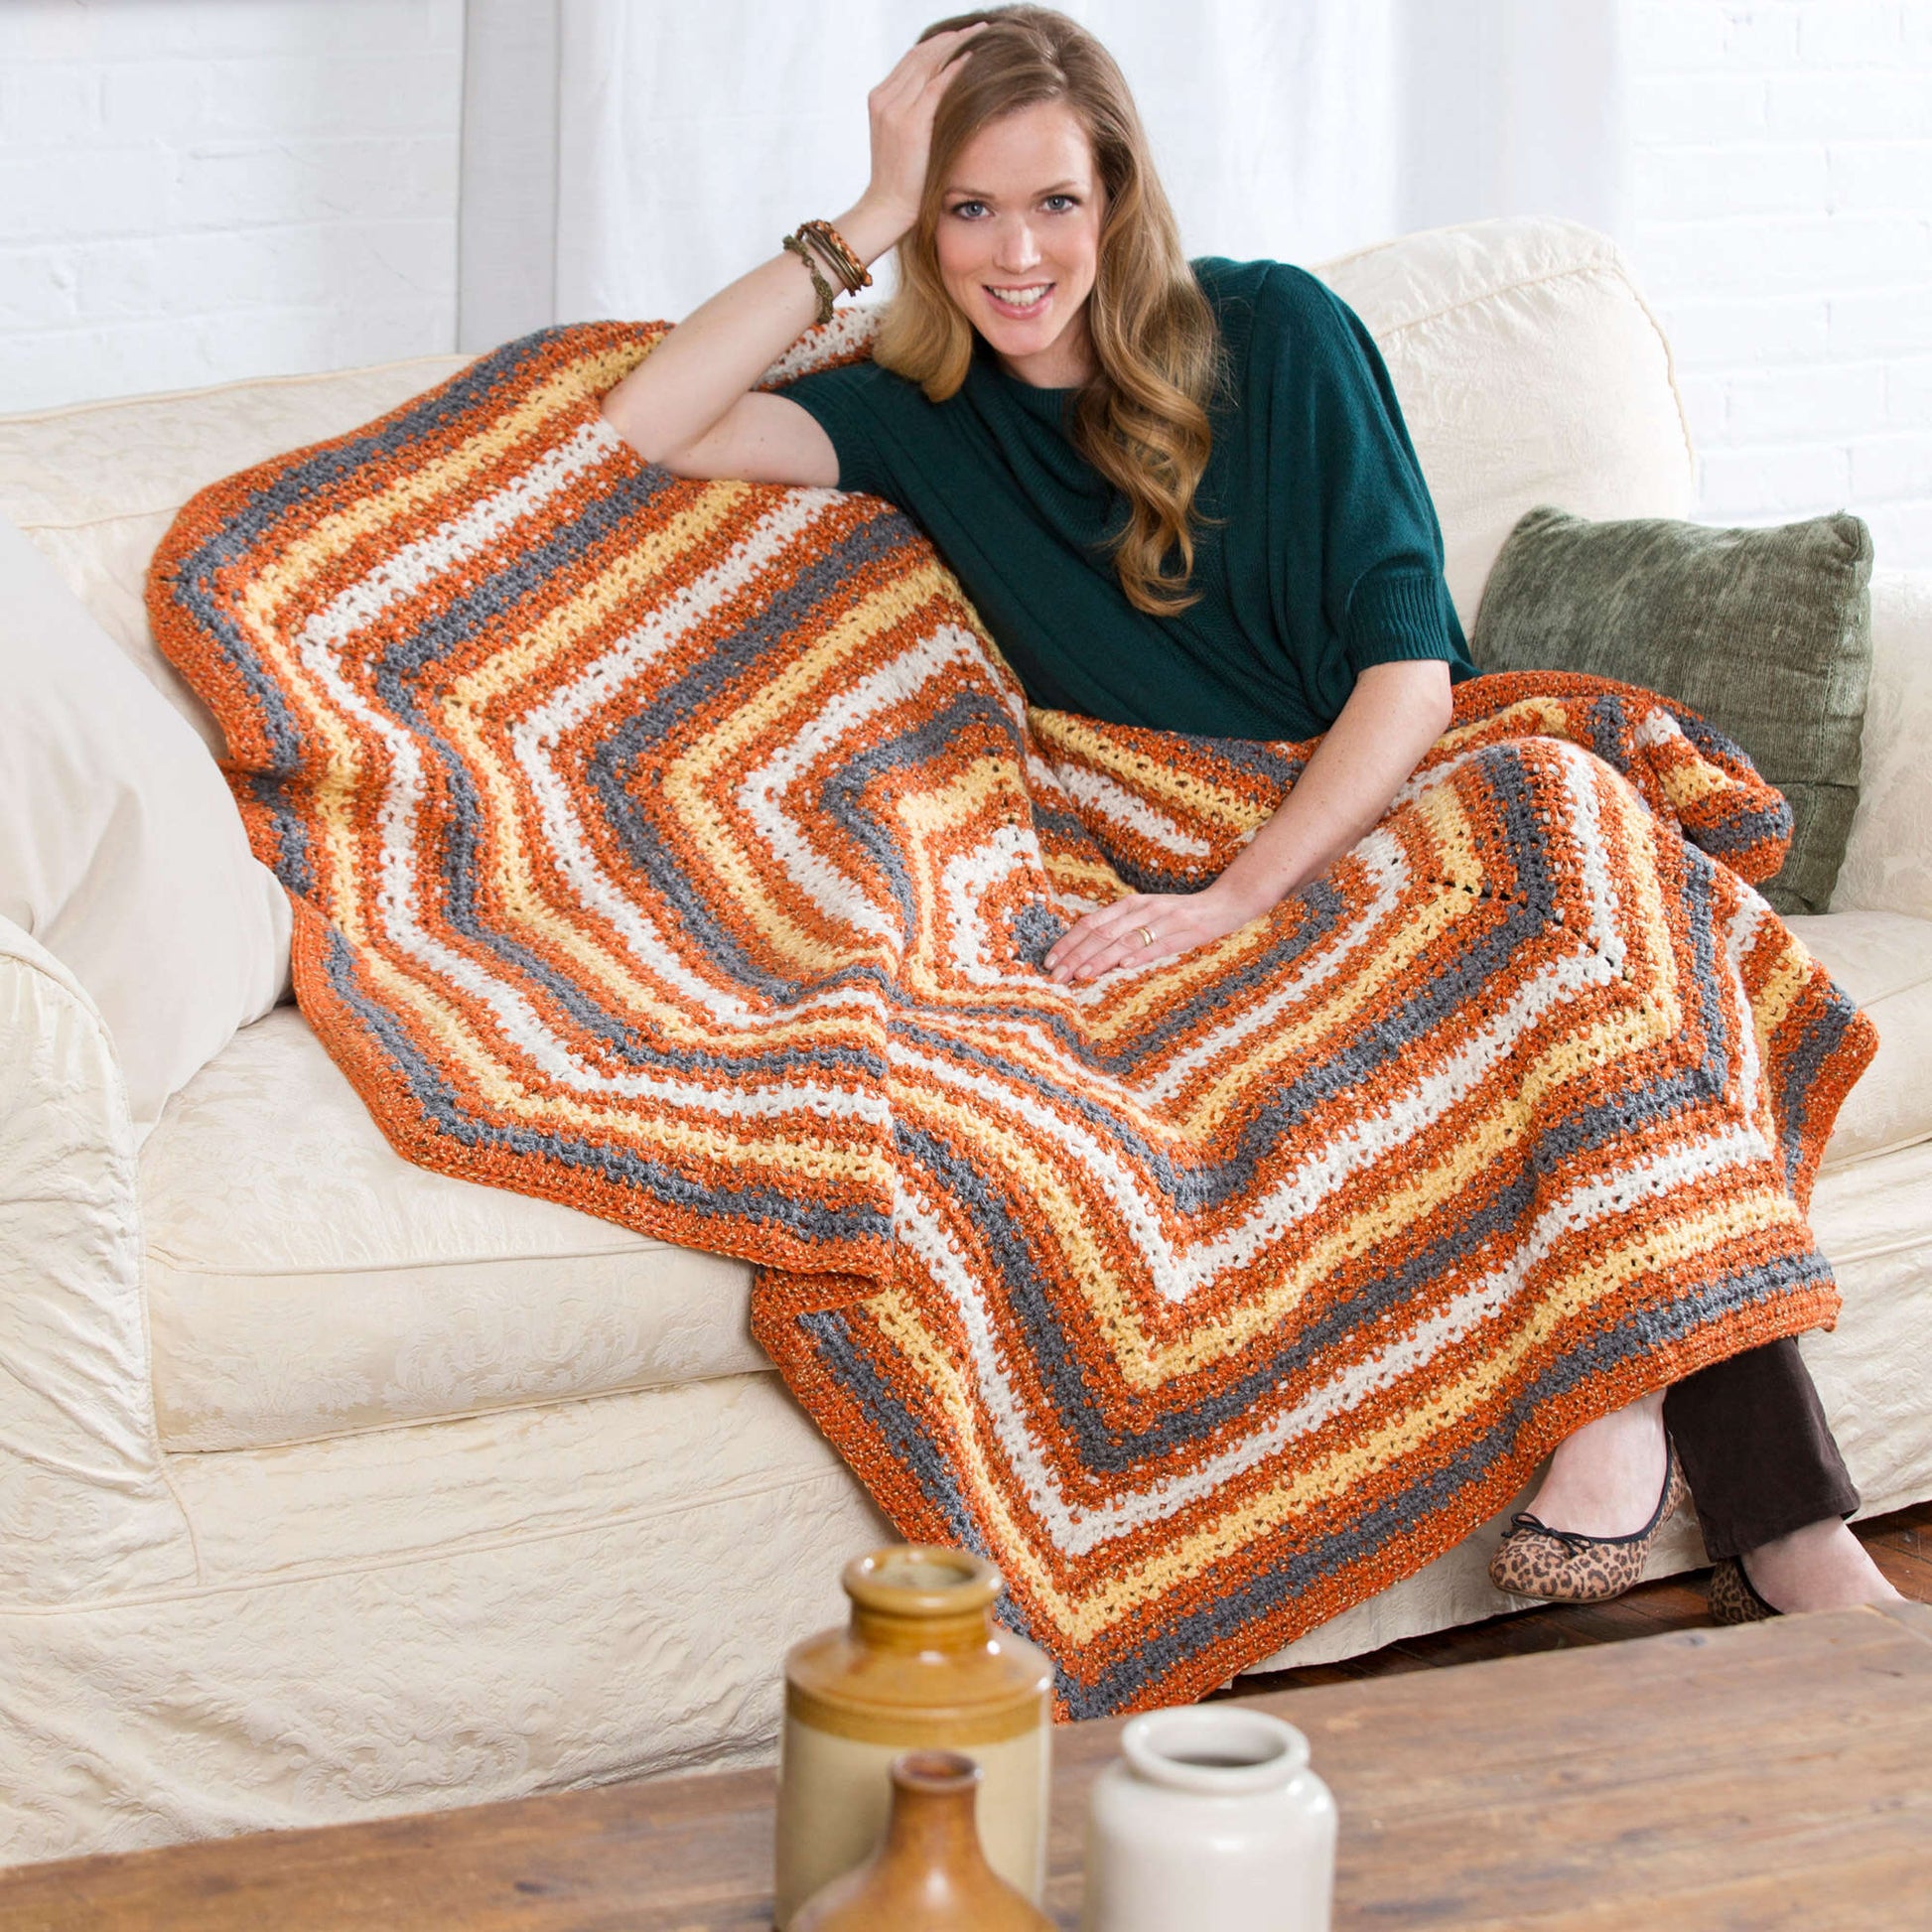 Free Red Heart Autumn Throw Knit Pattern